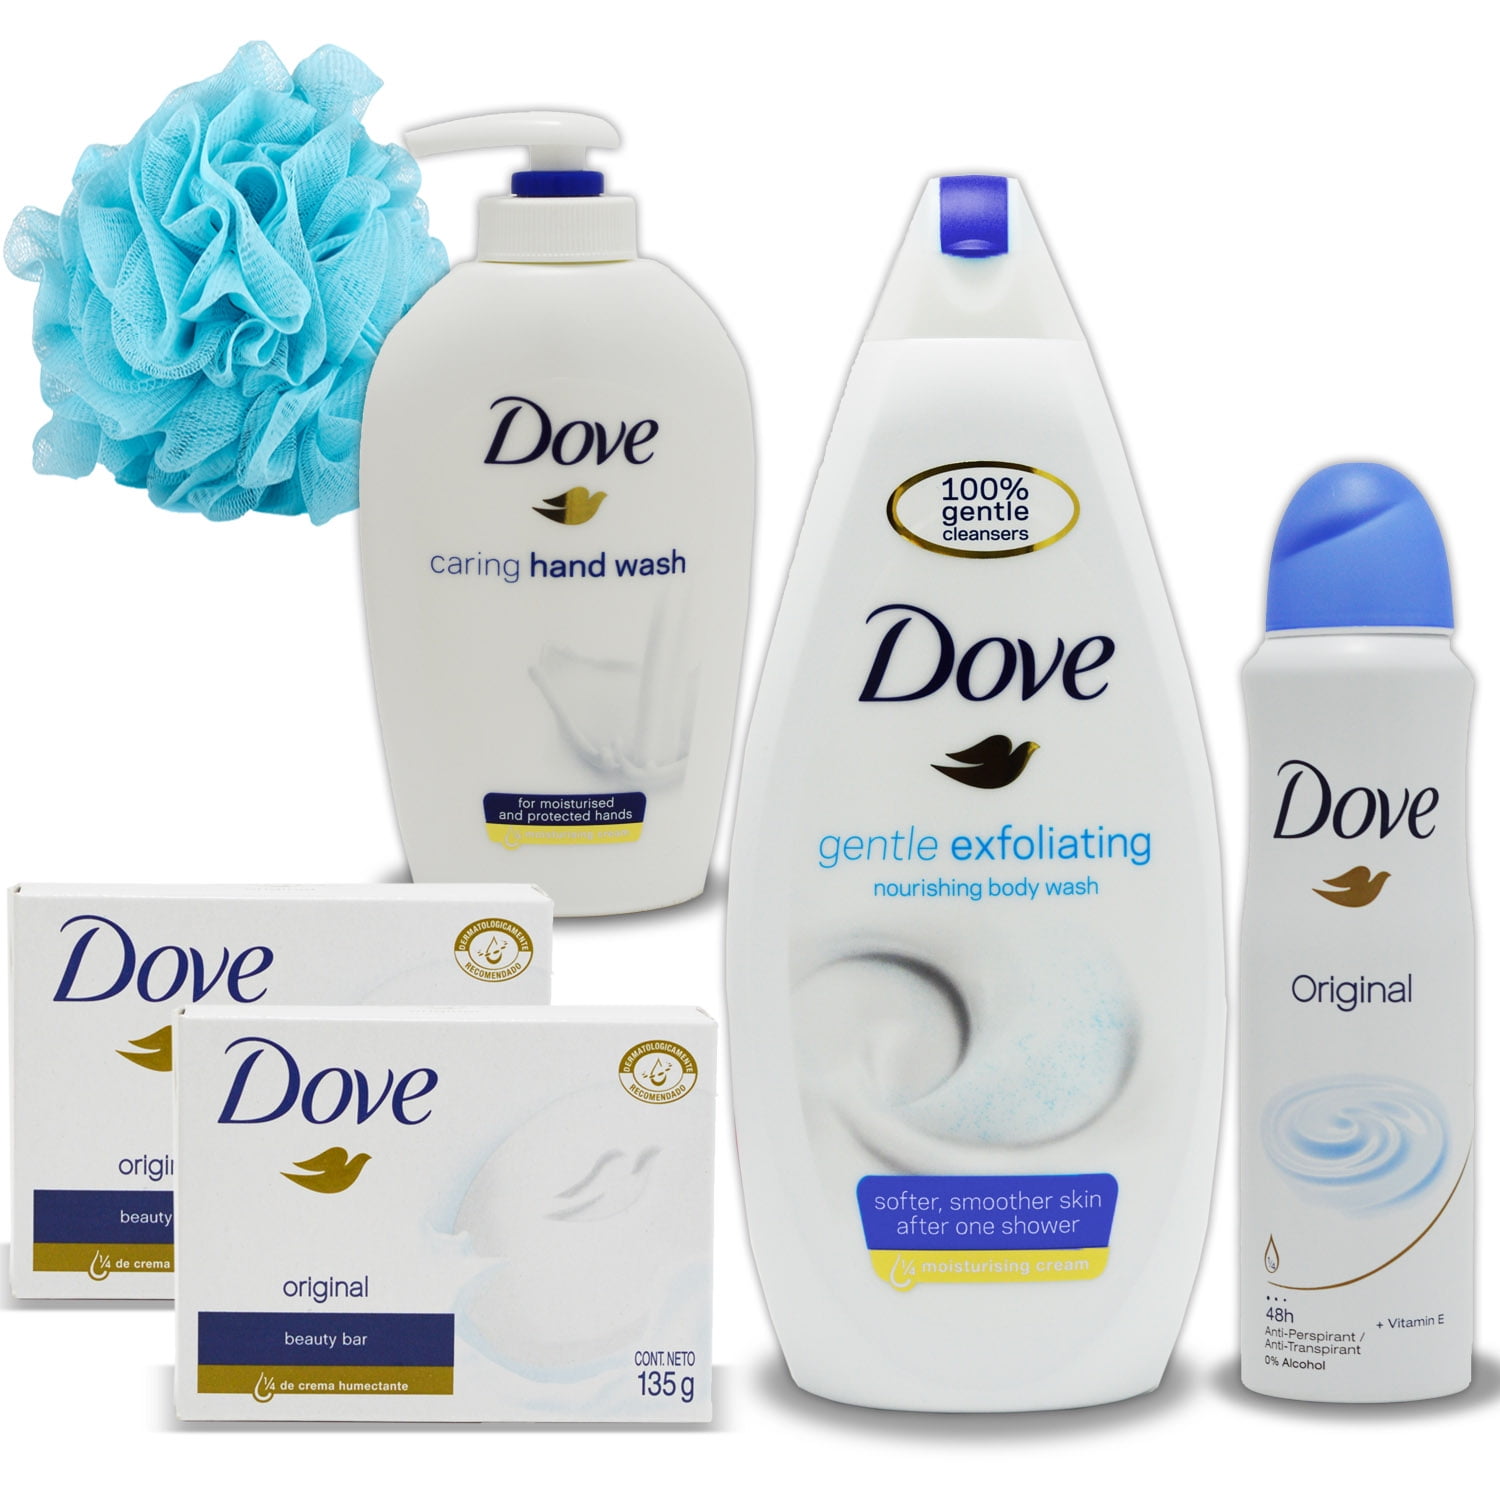 Dove Gift Pack: 25 Oz Gentle Exfoliating Scent Shower Gel Body Wash For